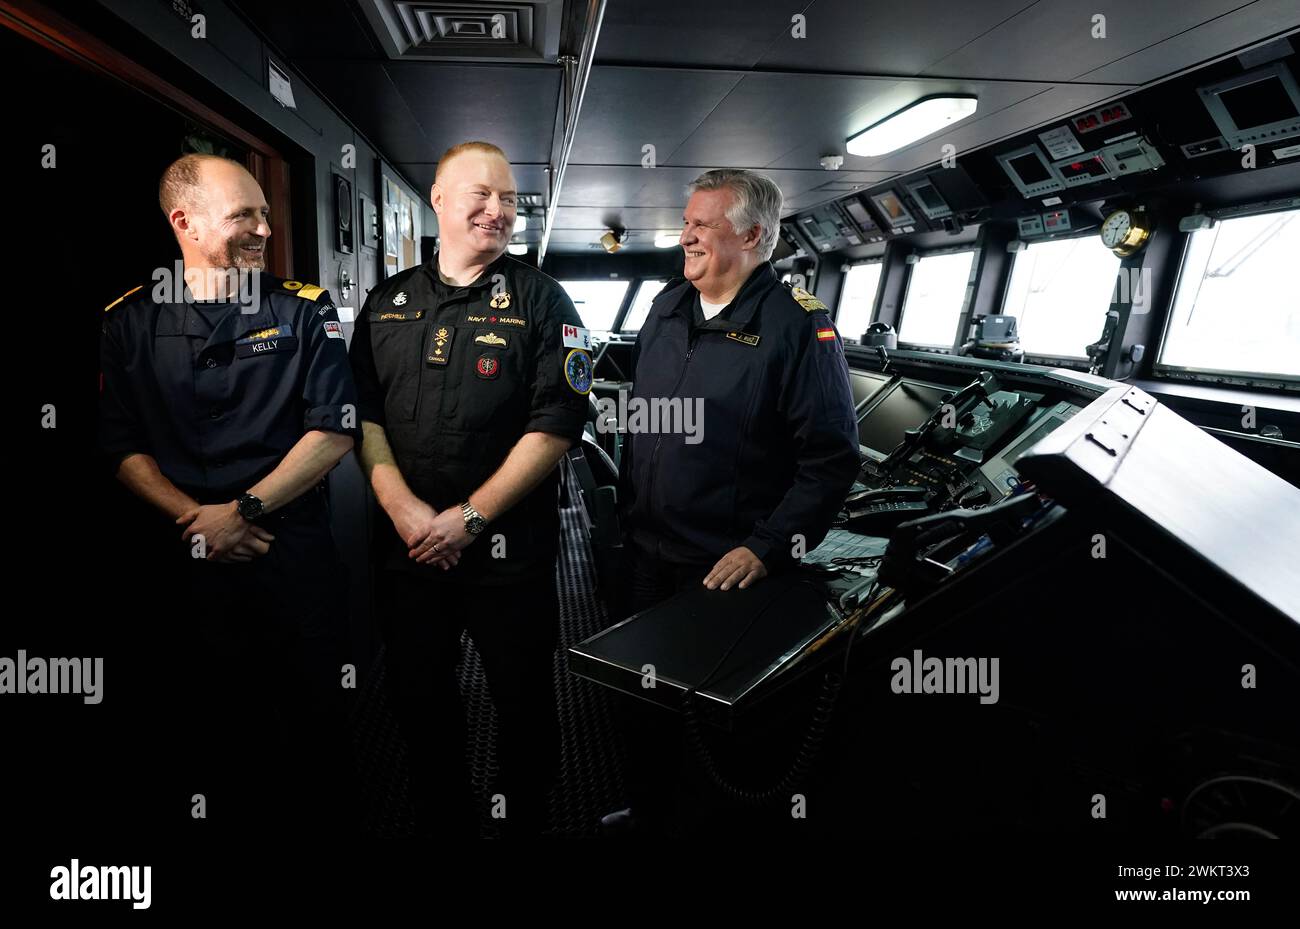 from left to right, Commodore Simon Kelly of the Royal Navy, deputy commander UK Strike Force, Rear Admiral David Patchell, vice commander US Second Fleet and Rear Admiral Joaquin Ruiz Escagedo, Commander of Standing Nato Maritime Group One on the bridge of the ESPS Almirante Juan de Borbon which is berthed at the Port of Southampton, and is the flagship of Standing Nato Maritime Group One. SNMG1, made up of five Alliance warships, while conducting the first major live exercise of Exercise Steadfast Defender 24 took part in gunnery exercises, as well as air defence simulations, alongside a Spa Stock Photo